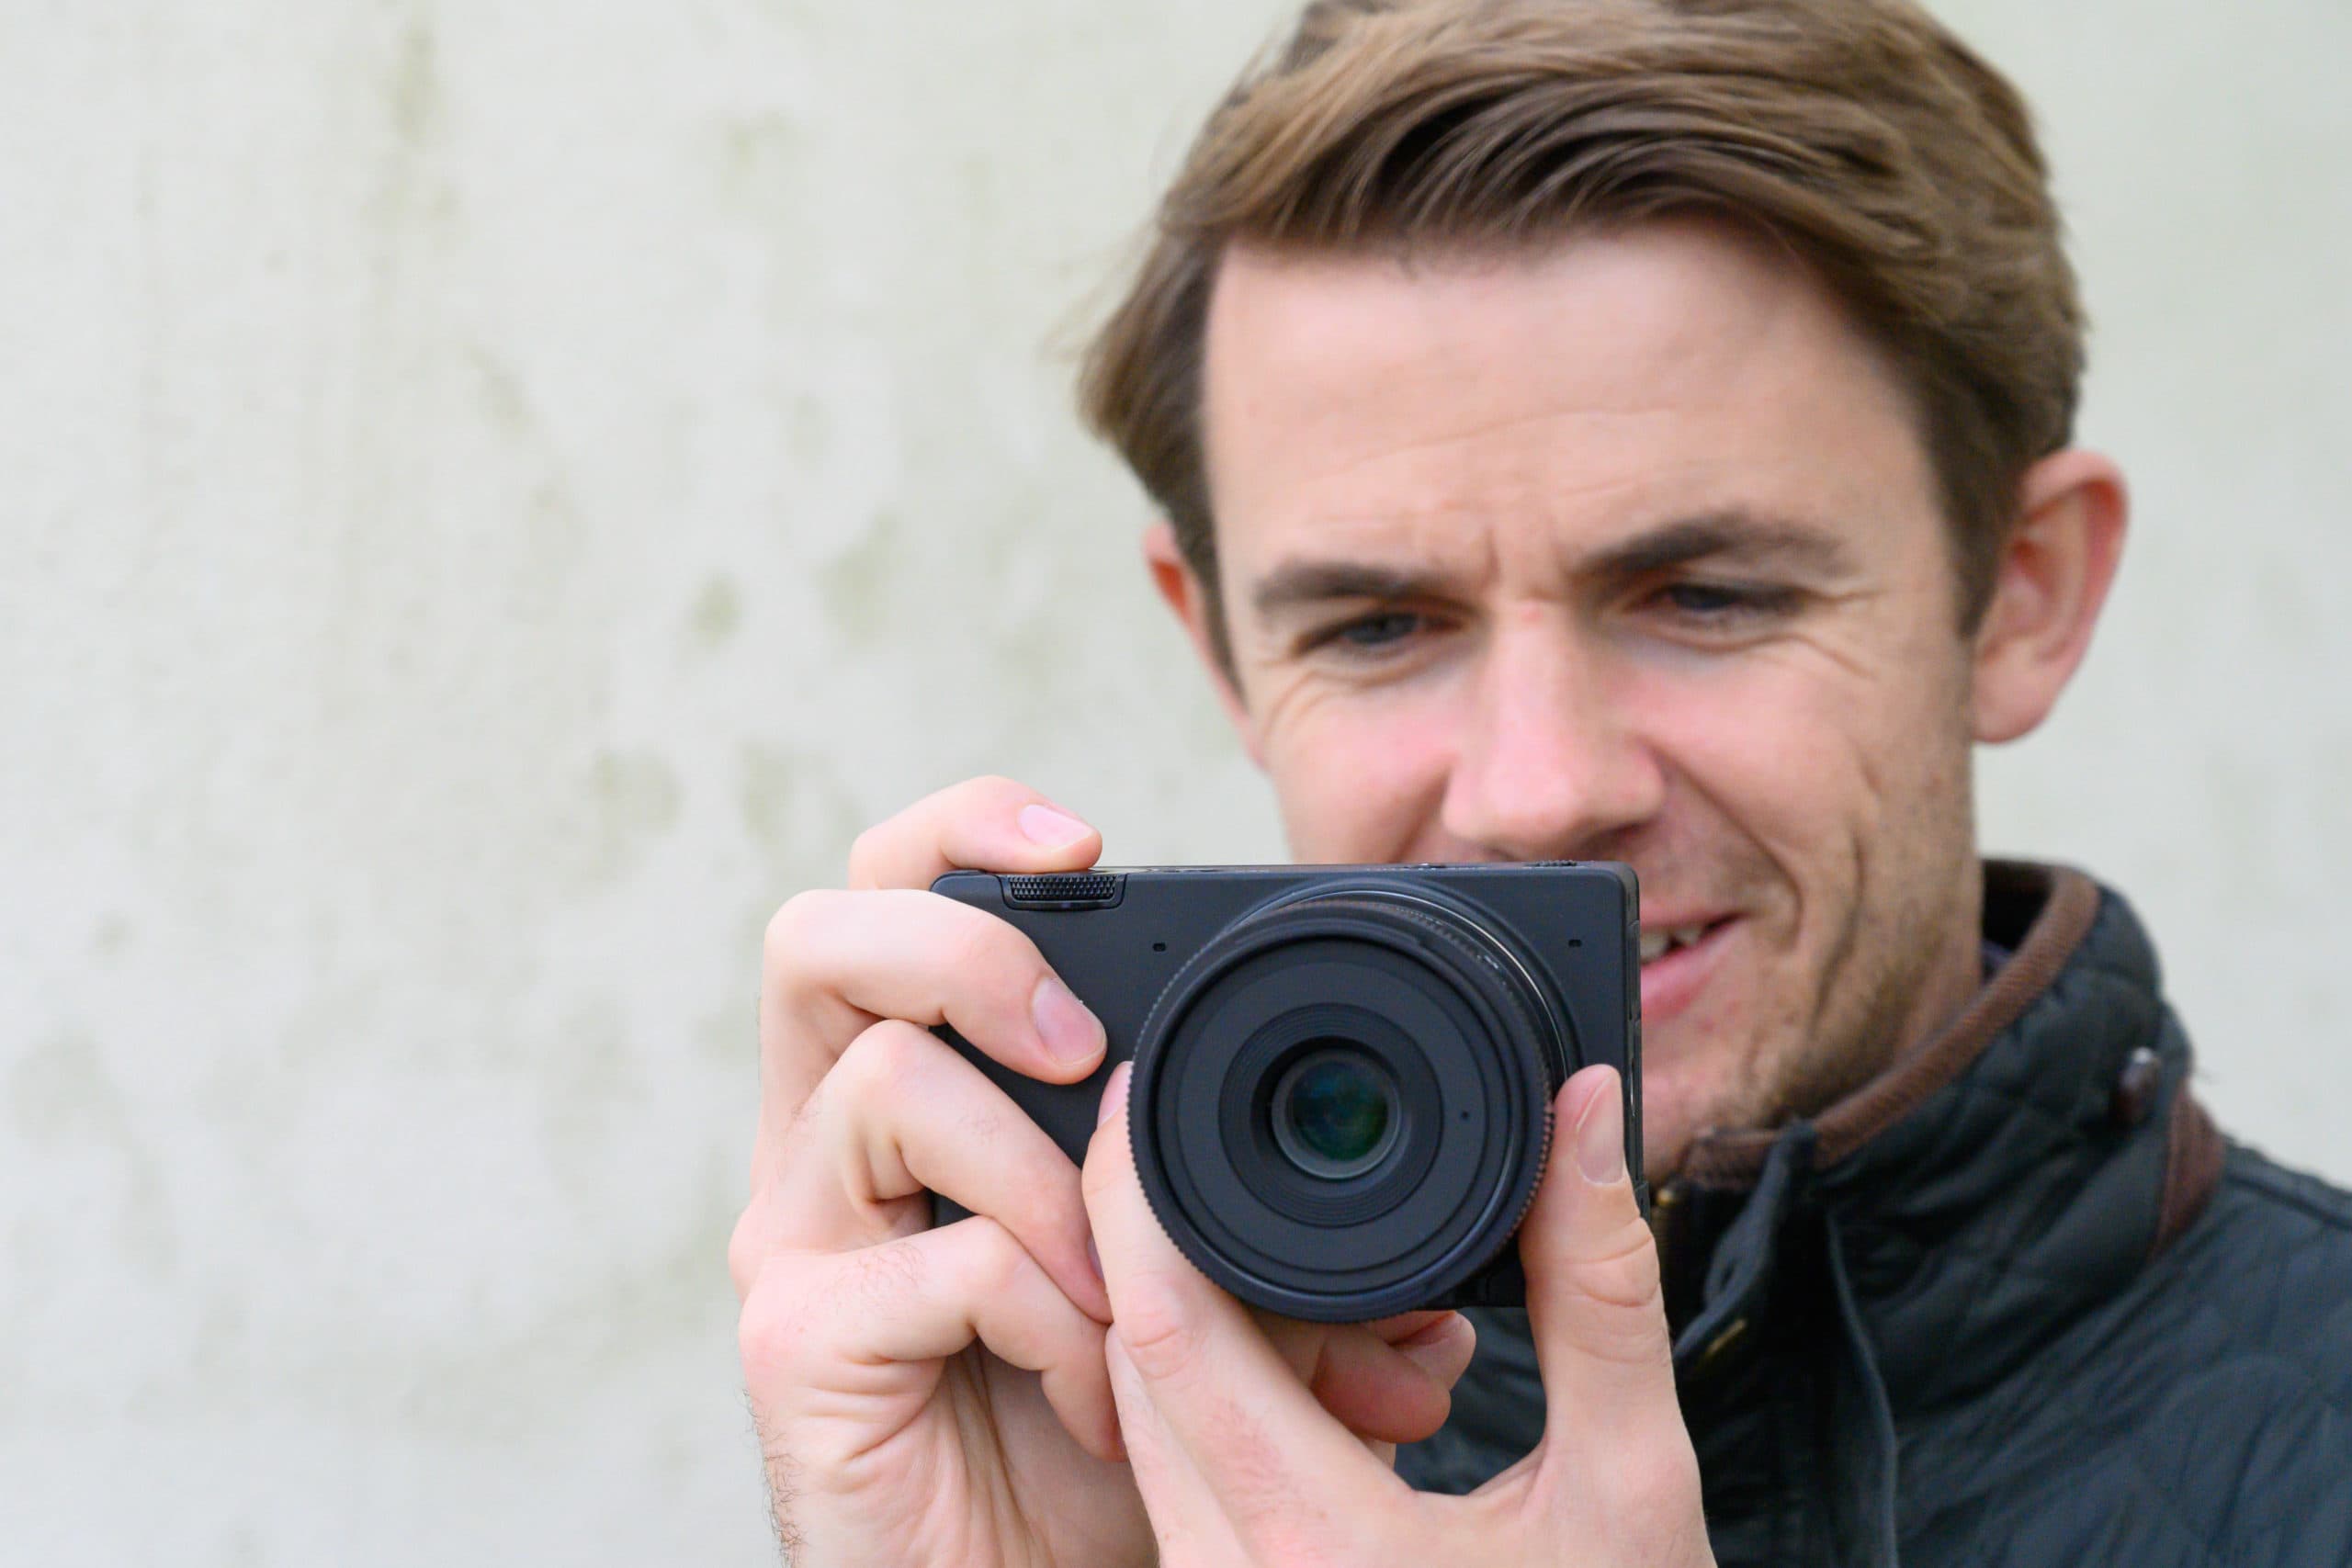 The Best Vlogging Cameras of 2019: Panasonic, Nikon, Sony, and Canon